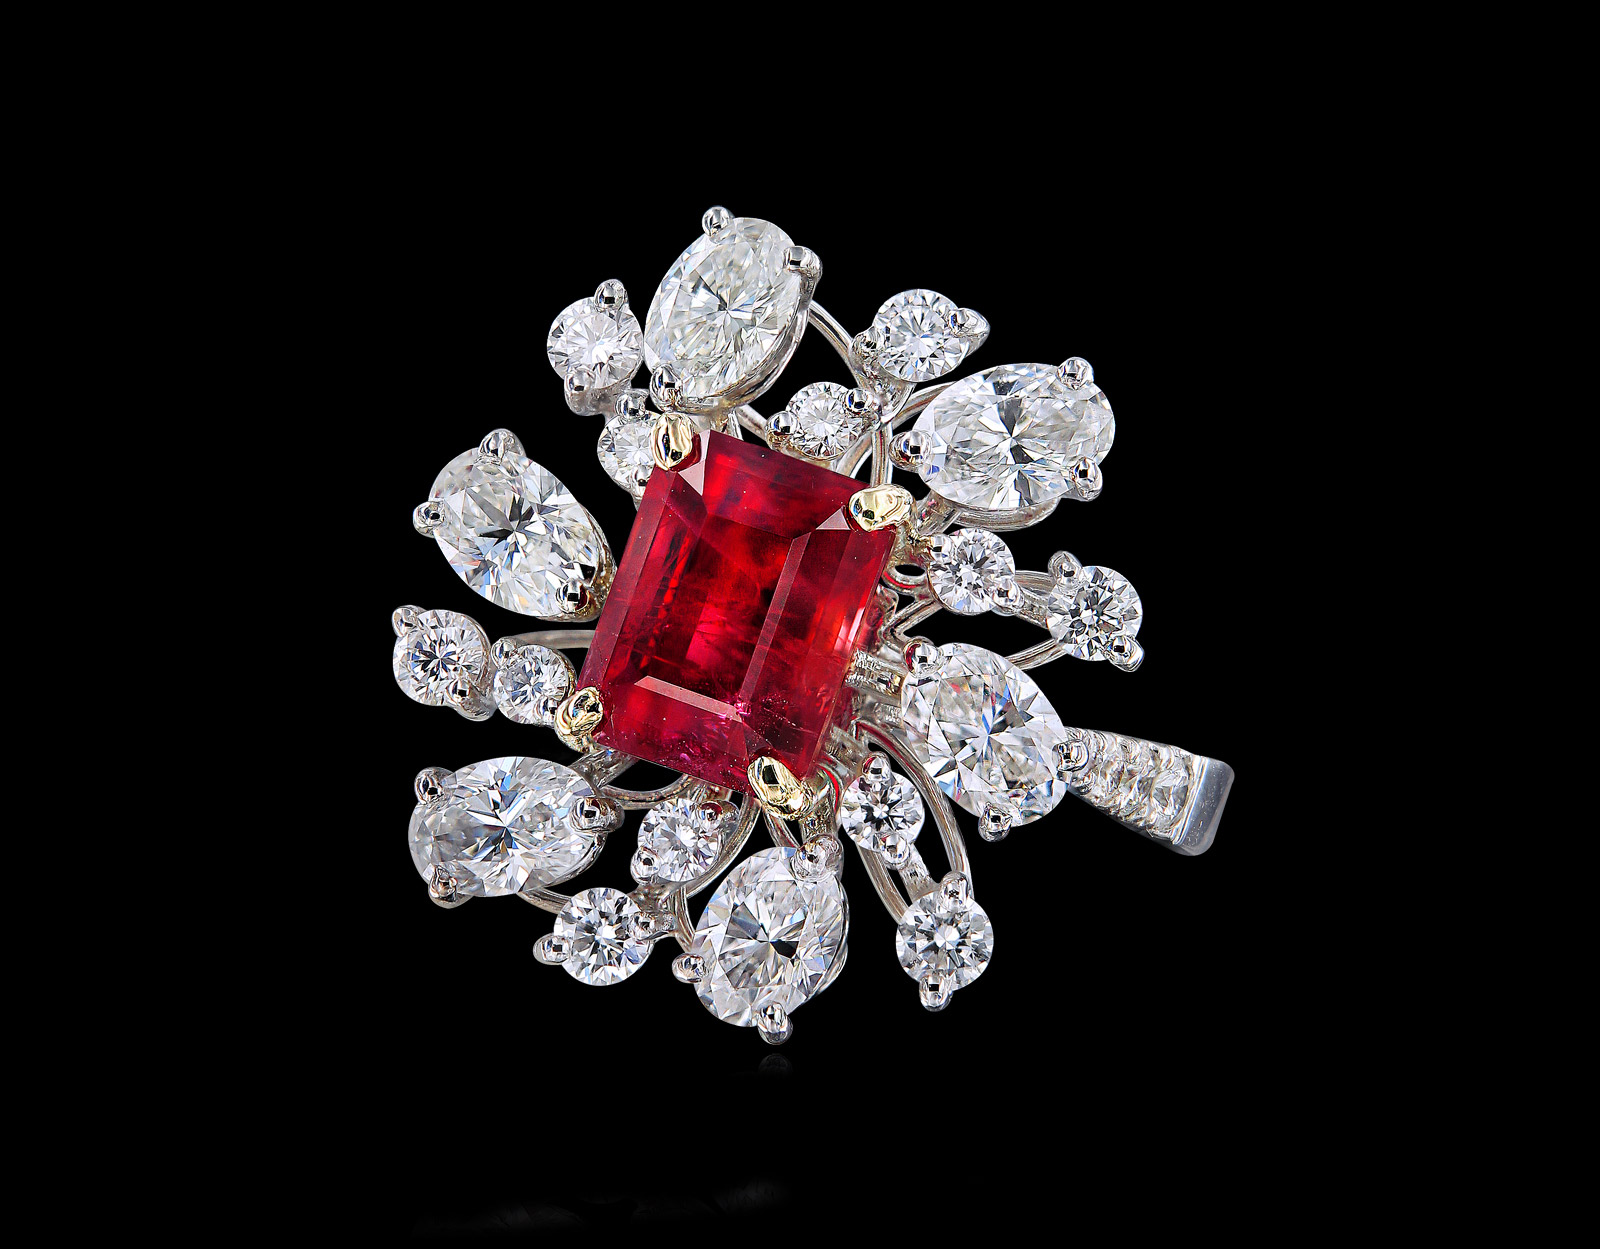 Caratell 2.20ct Bixbite / Red beryl and 2.32ct Diamond cocktail ring from 'Sun Ray' collection